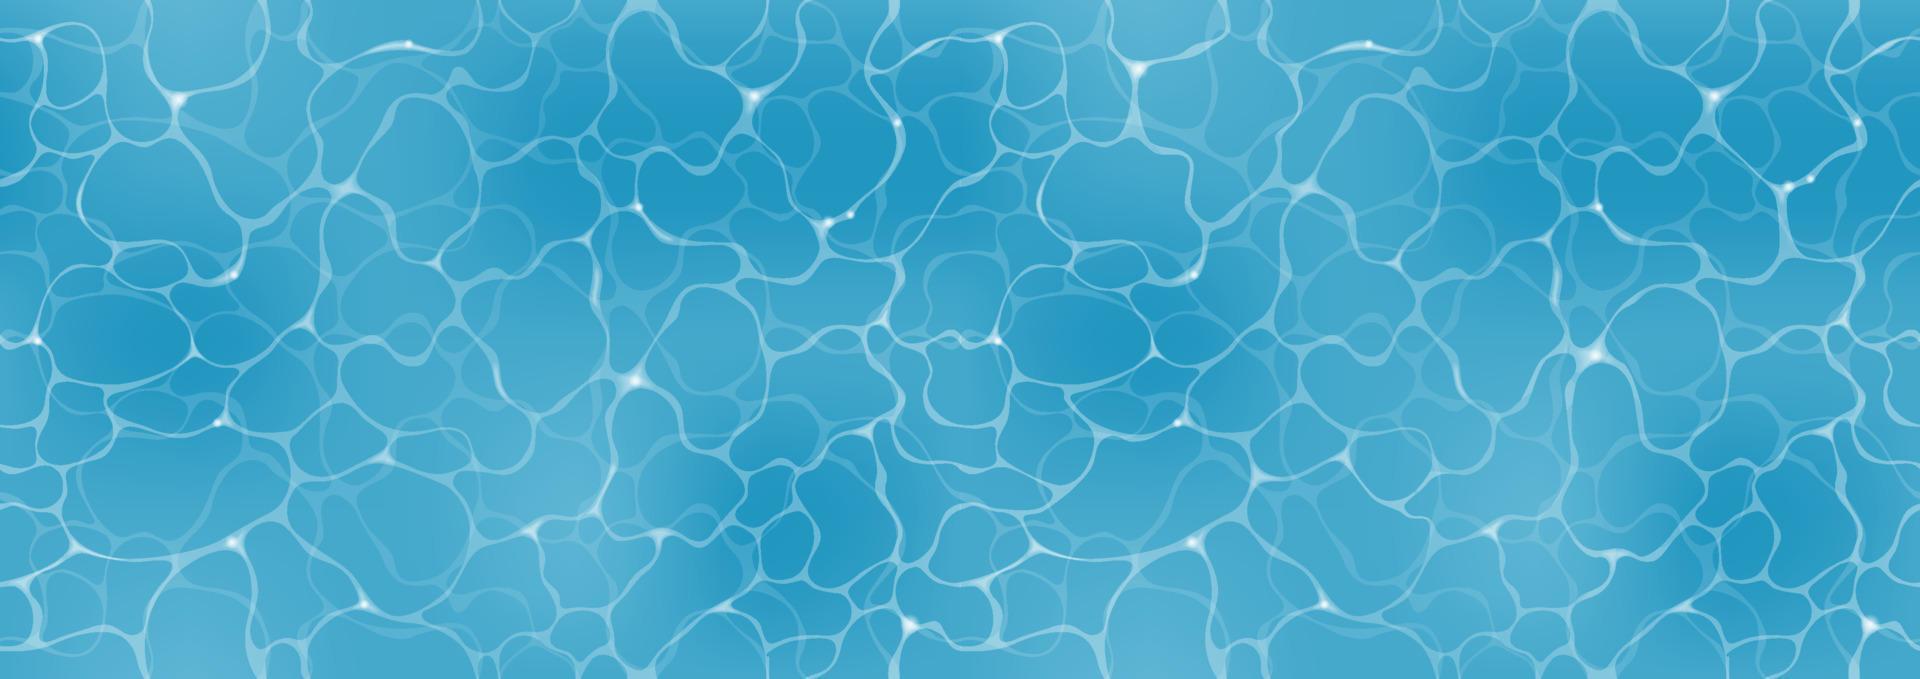 Vector Seamless Rippled Swimming Pool Abstract Background Illustration. Horizontally And Vertically Repeatable.